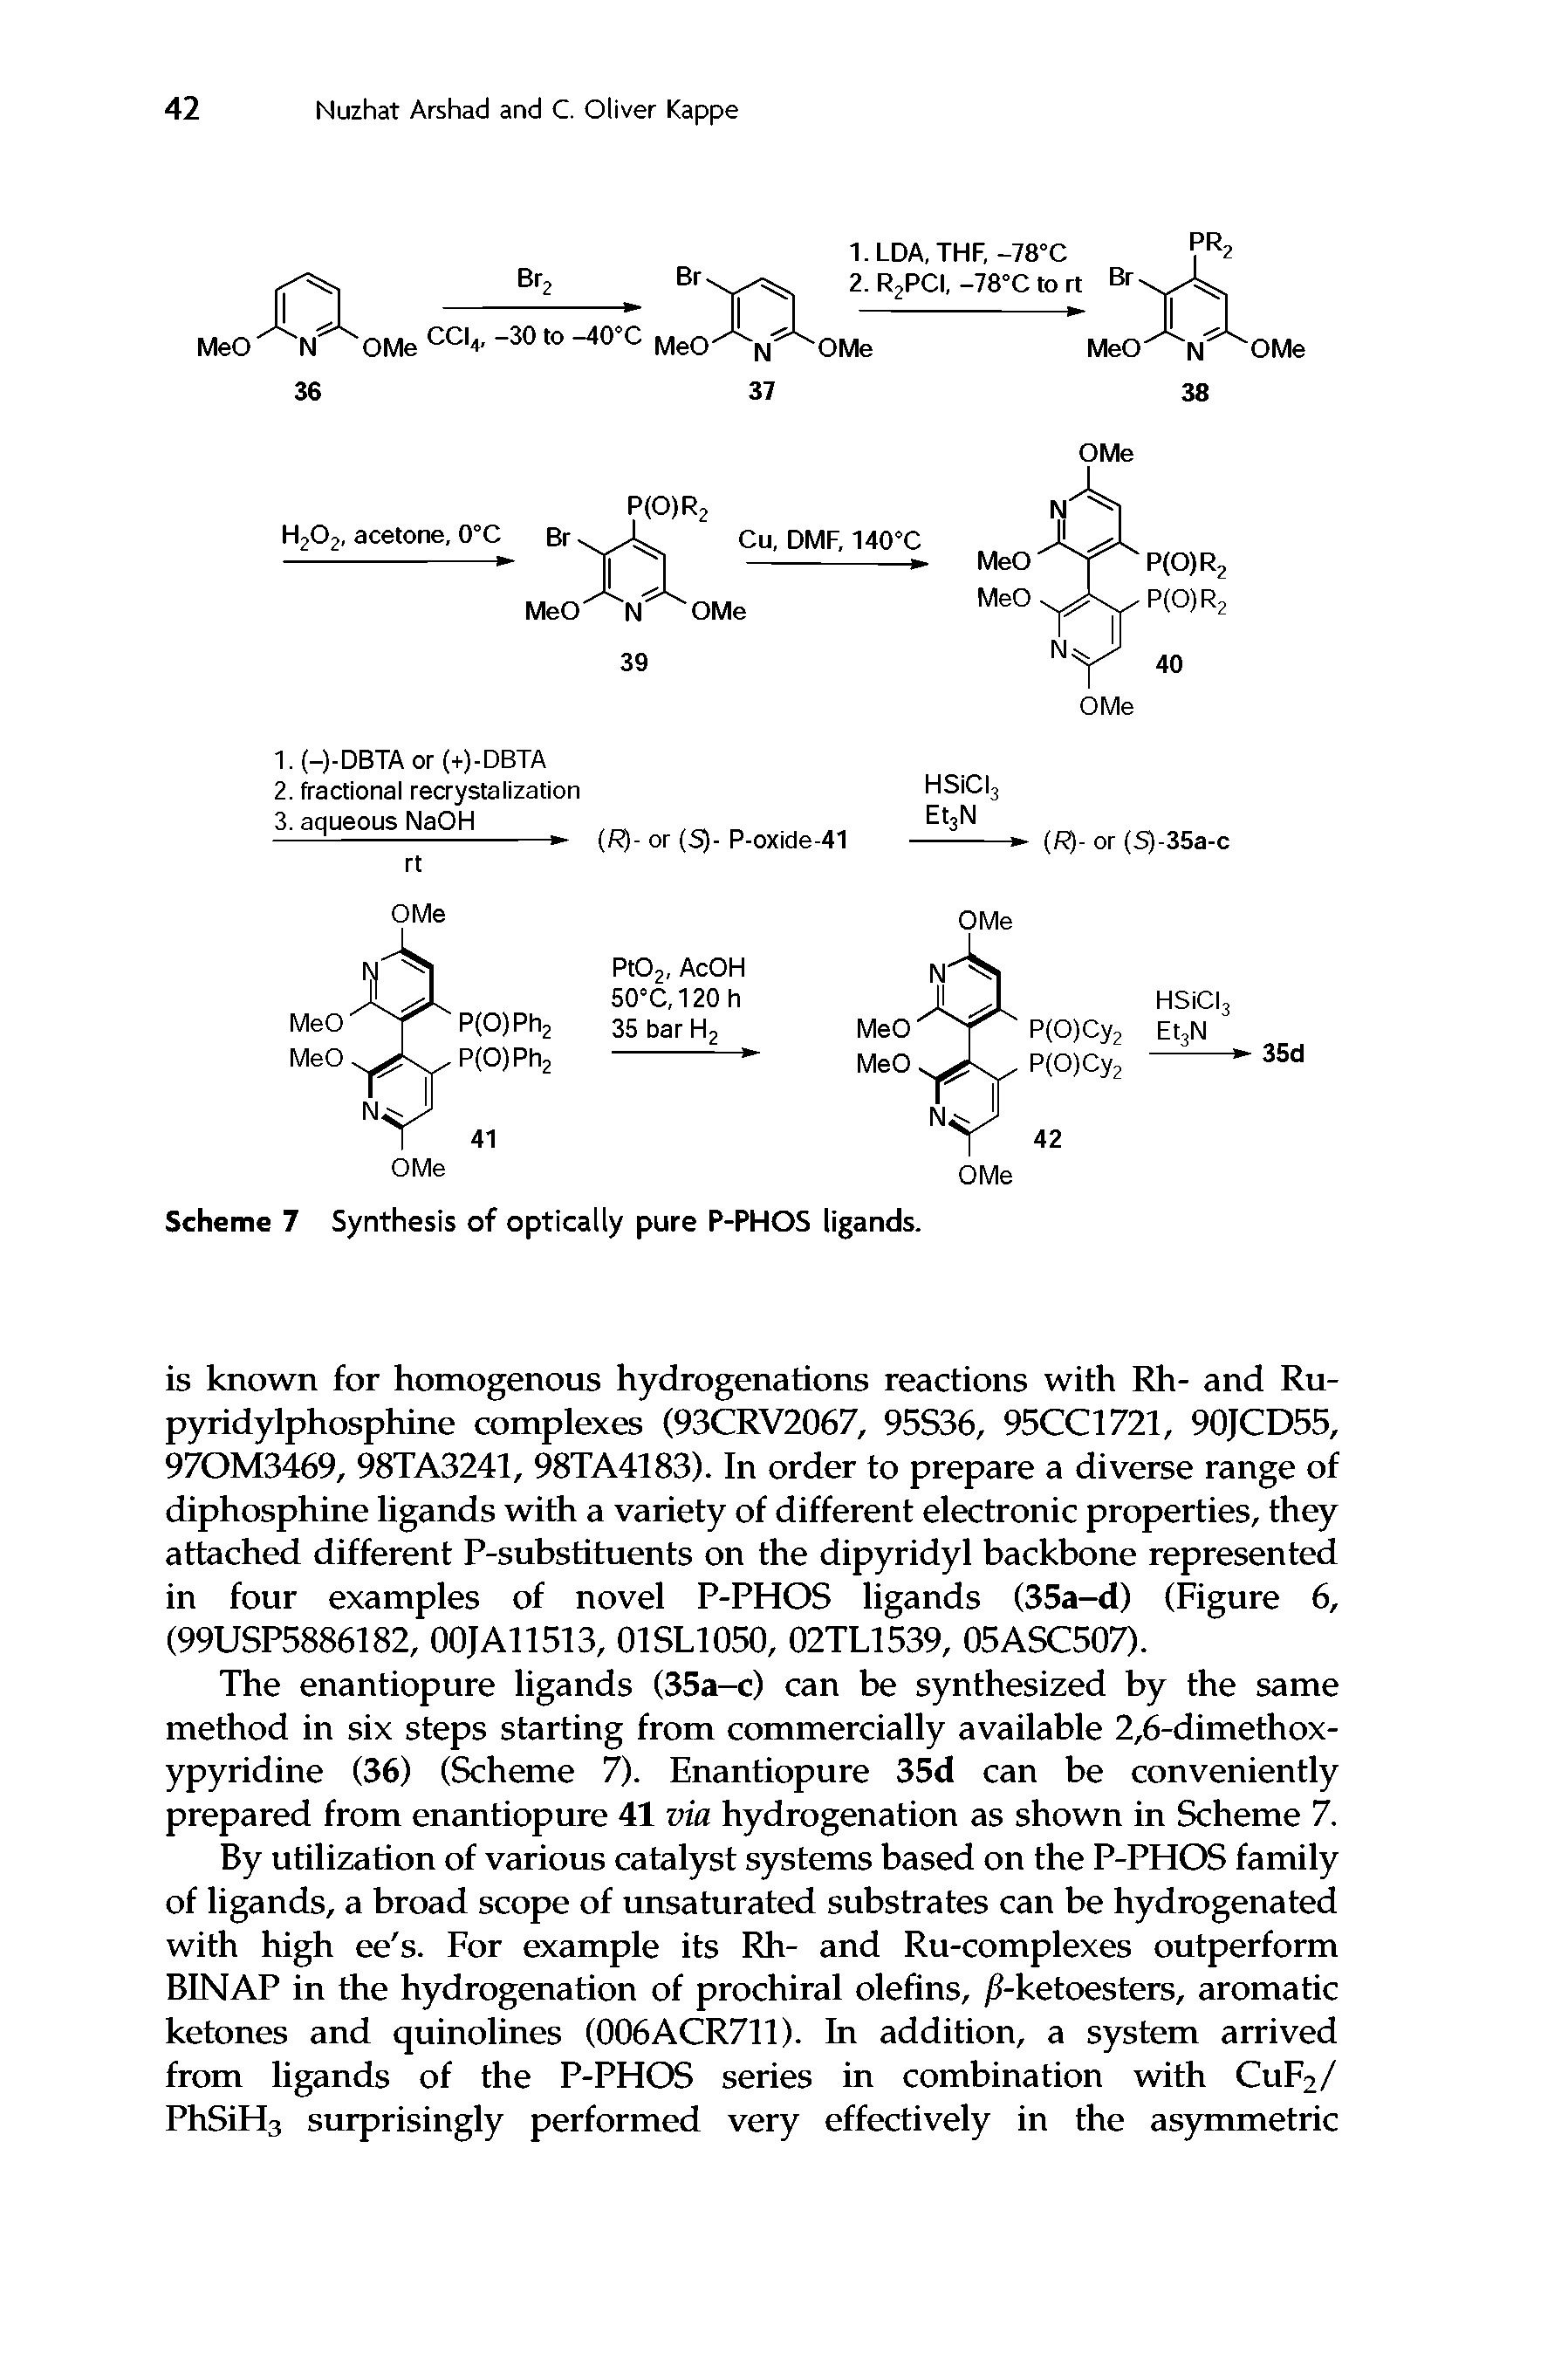 Scheme 7 Synthesis of optically pure P-PHOS ligands.